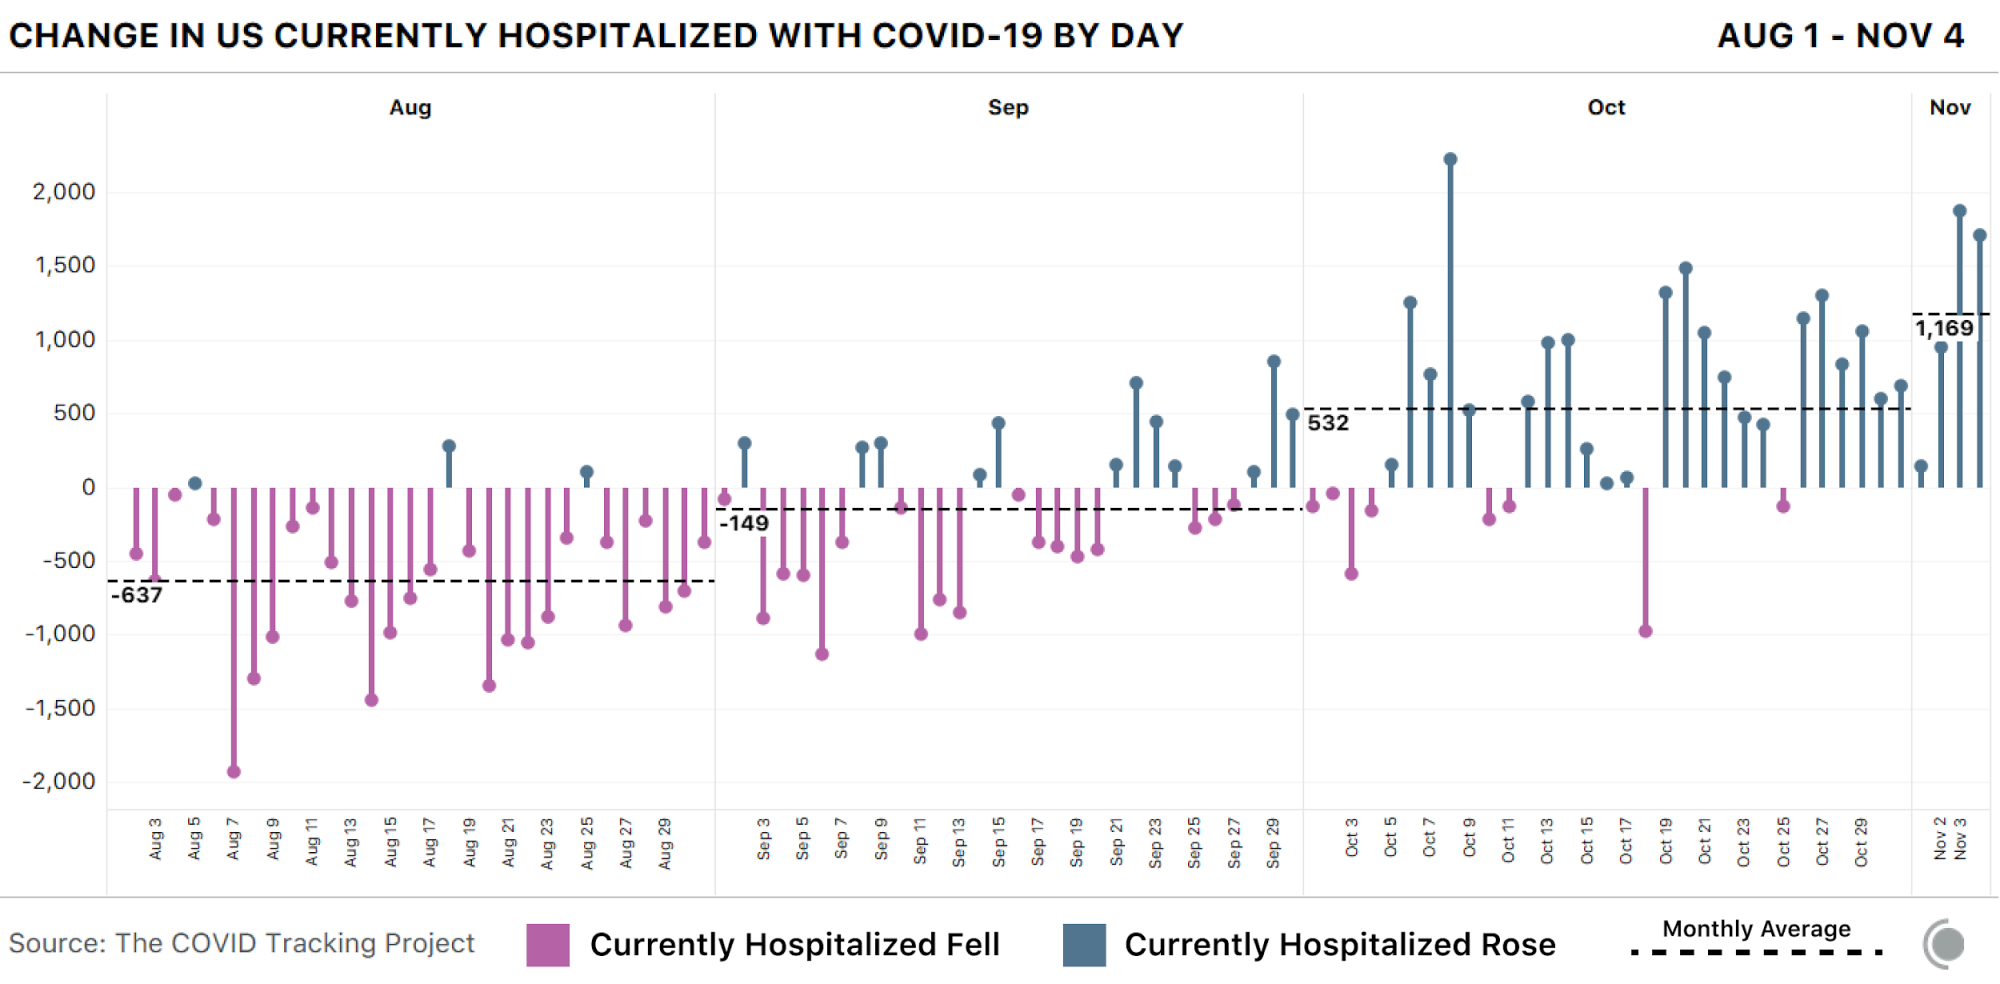  Chart showing the change in the number of currently hospitalized people with COVID-19 in the US day over day since August 1. Hospitalizations are growing, and growing faster, in more recent weeks.